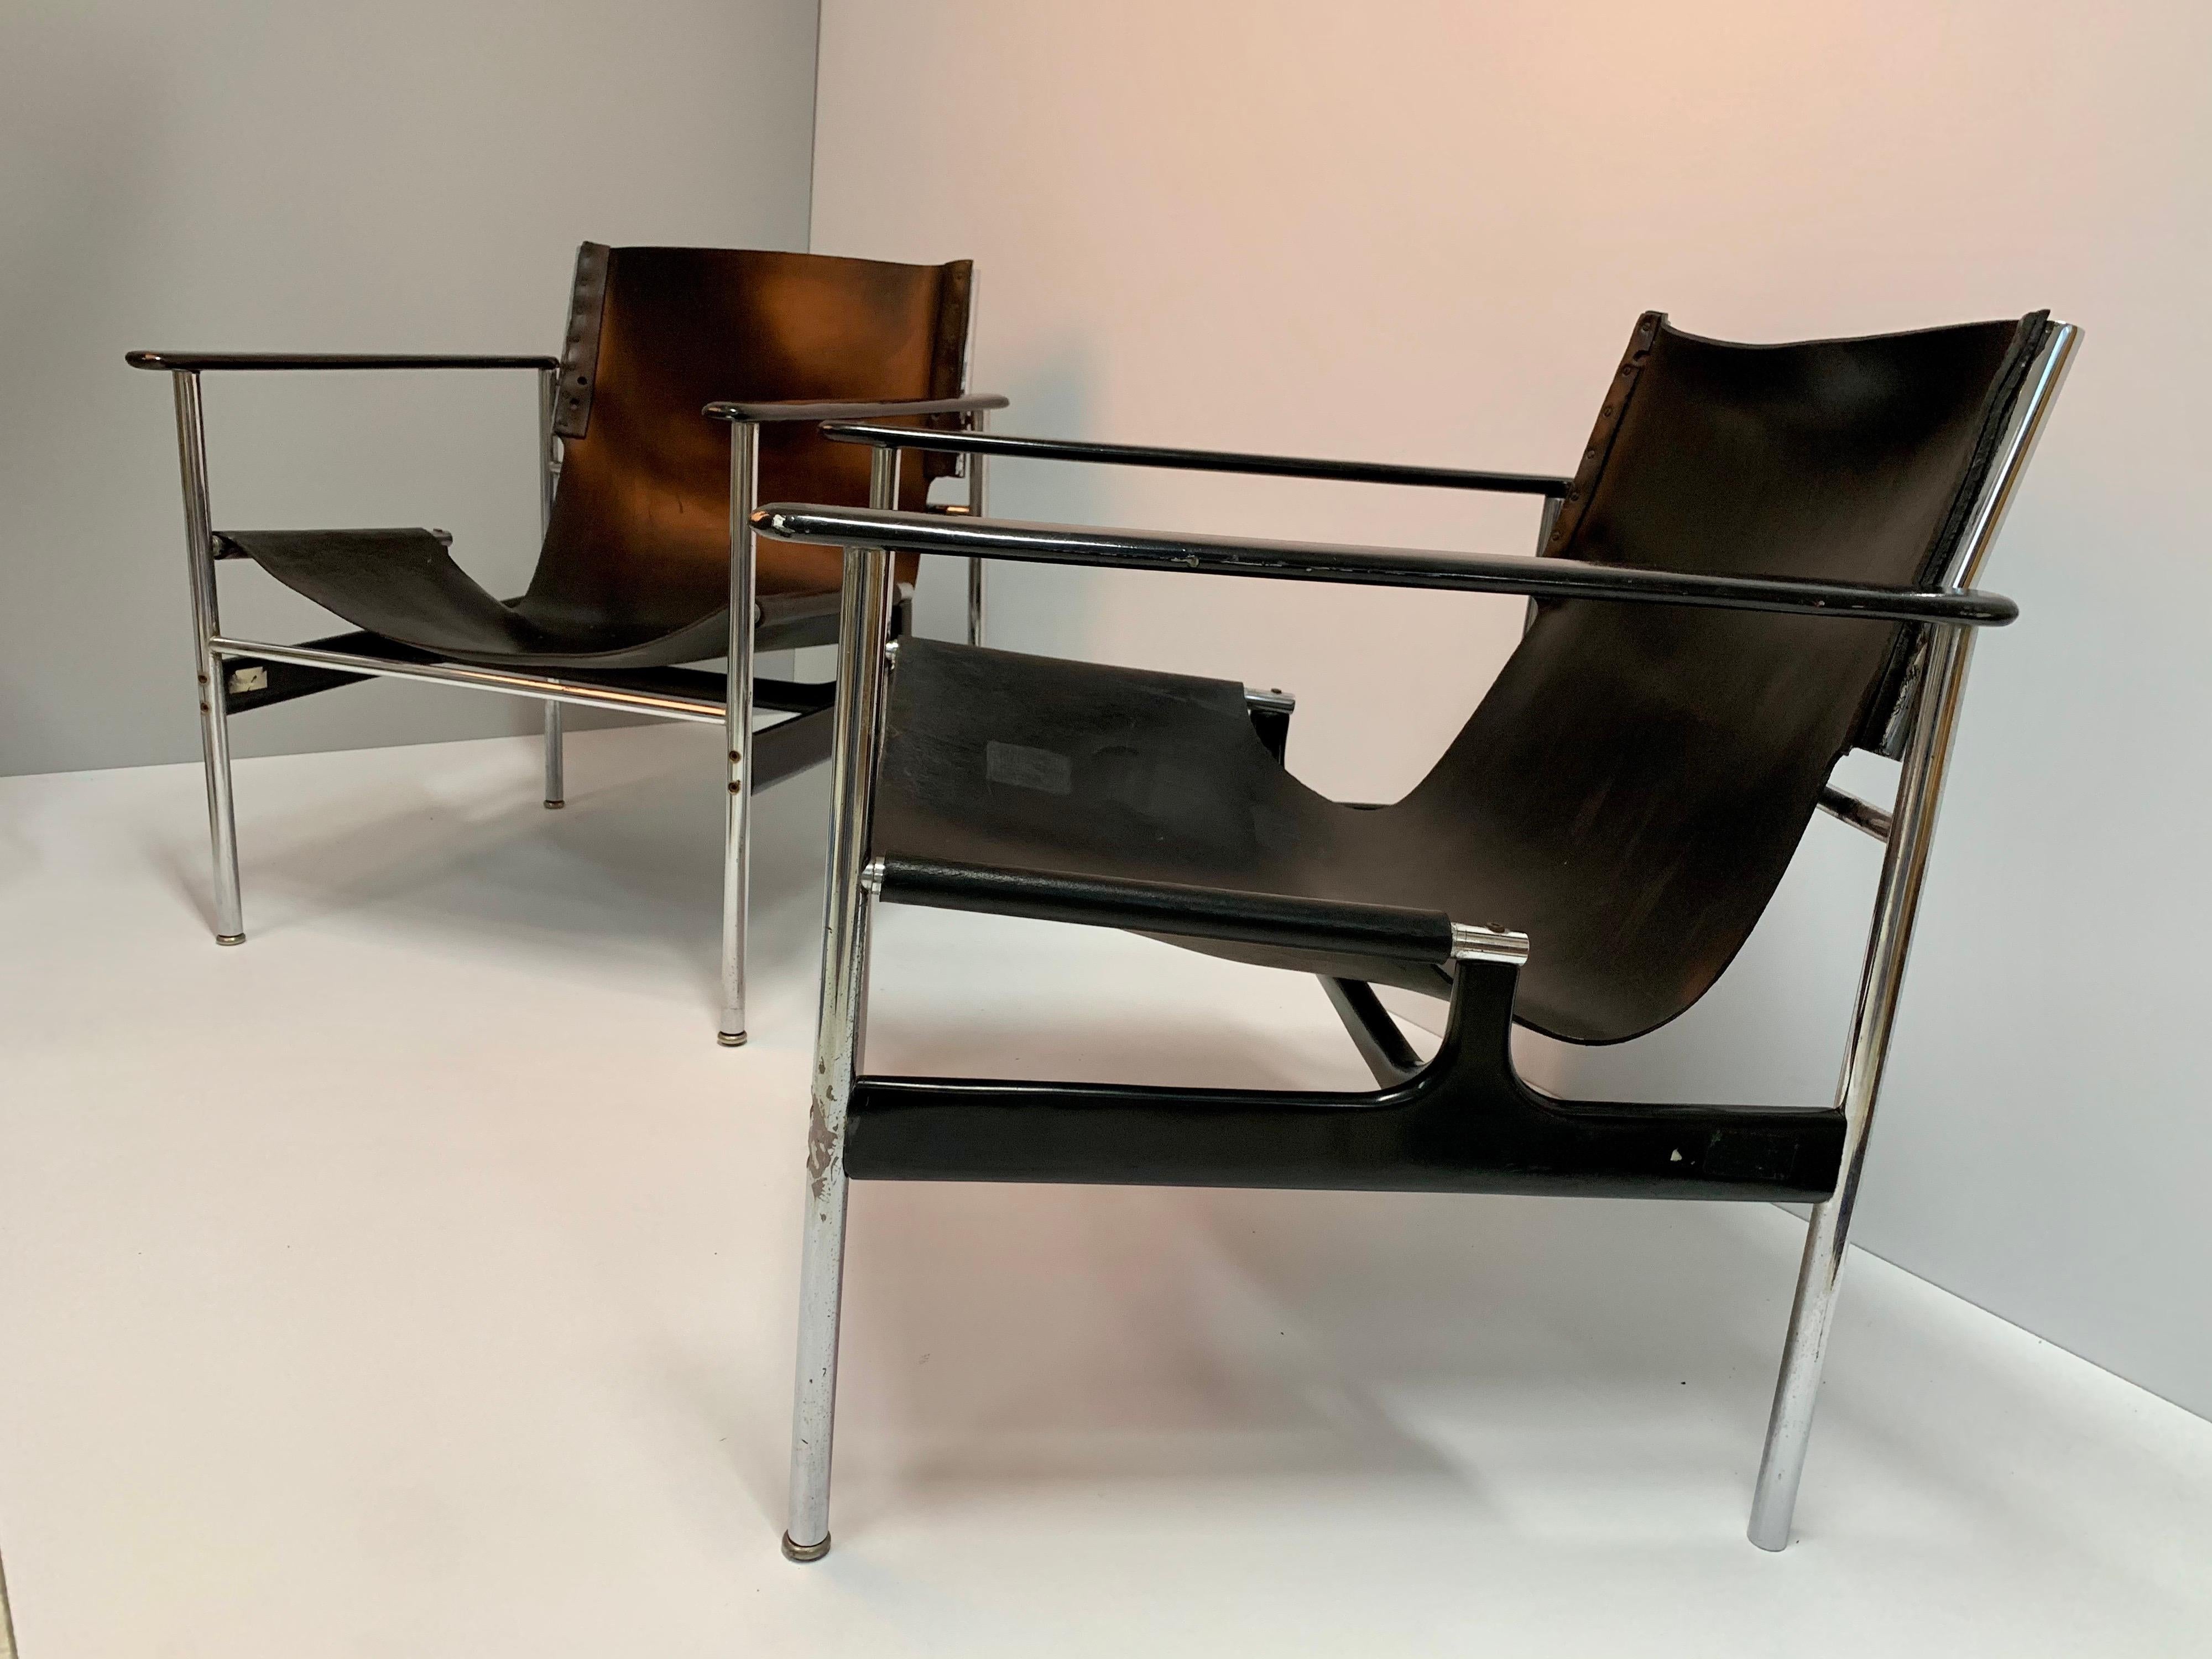 Designed in 1960 and originally manufactured from 1964-79, the steel and leather ‘sling chair’ or '657', as it is commonly called, offers a refined combination of materials and finishes. Tubular steel legs connect to cast-aluminum arms and